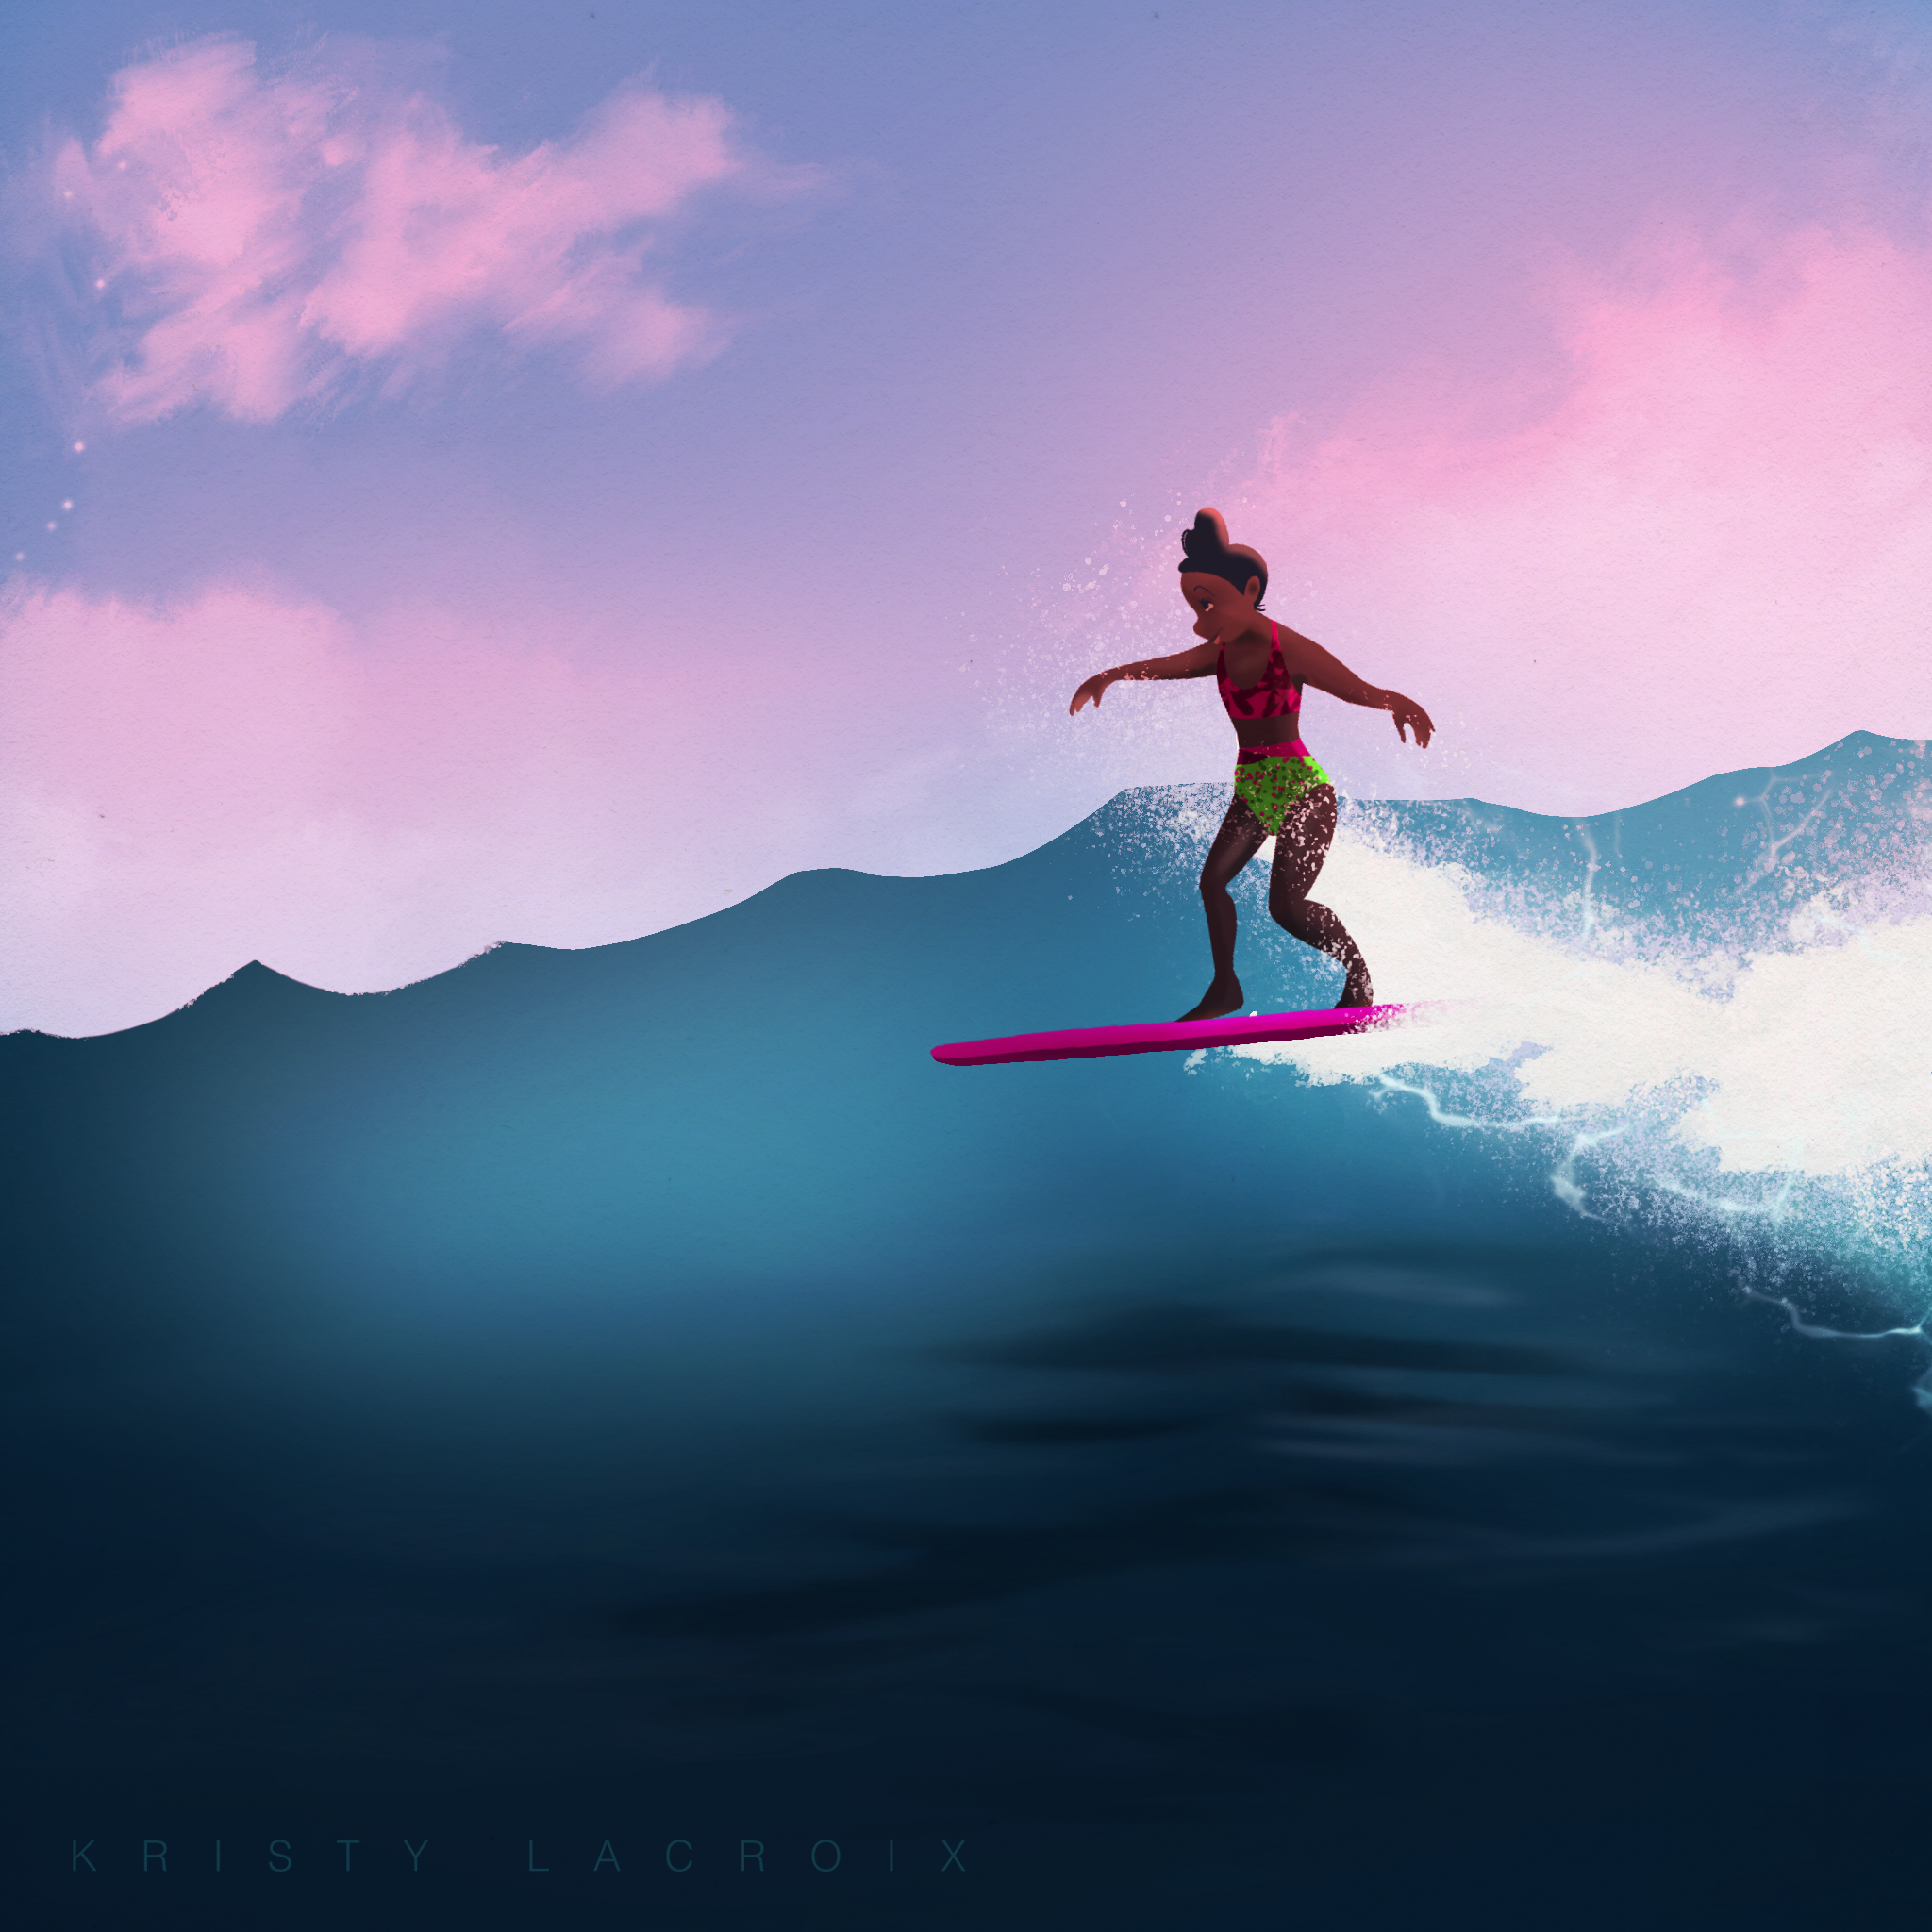 A surfer girl at sunset catching a wave.